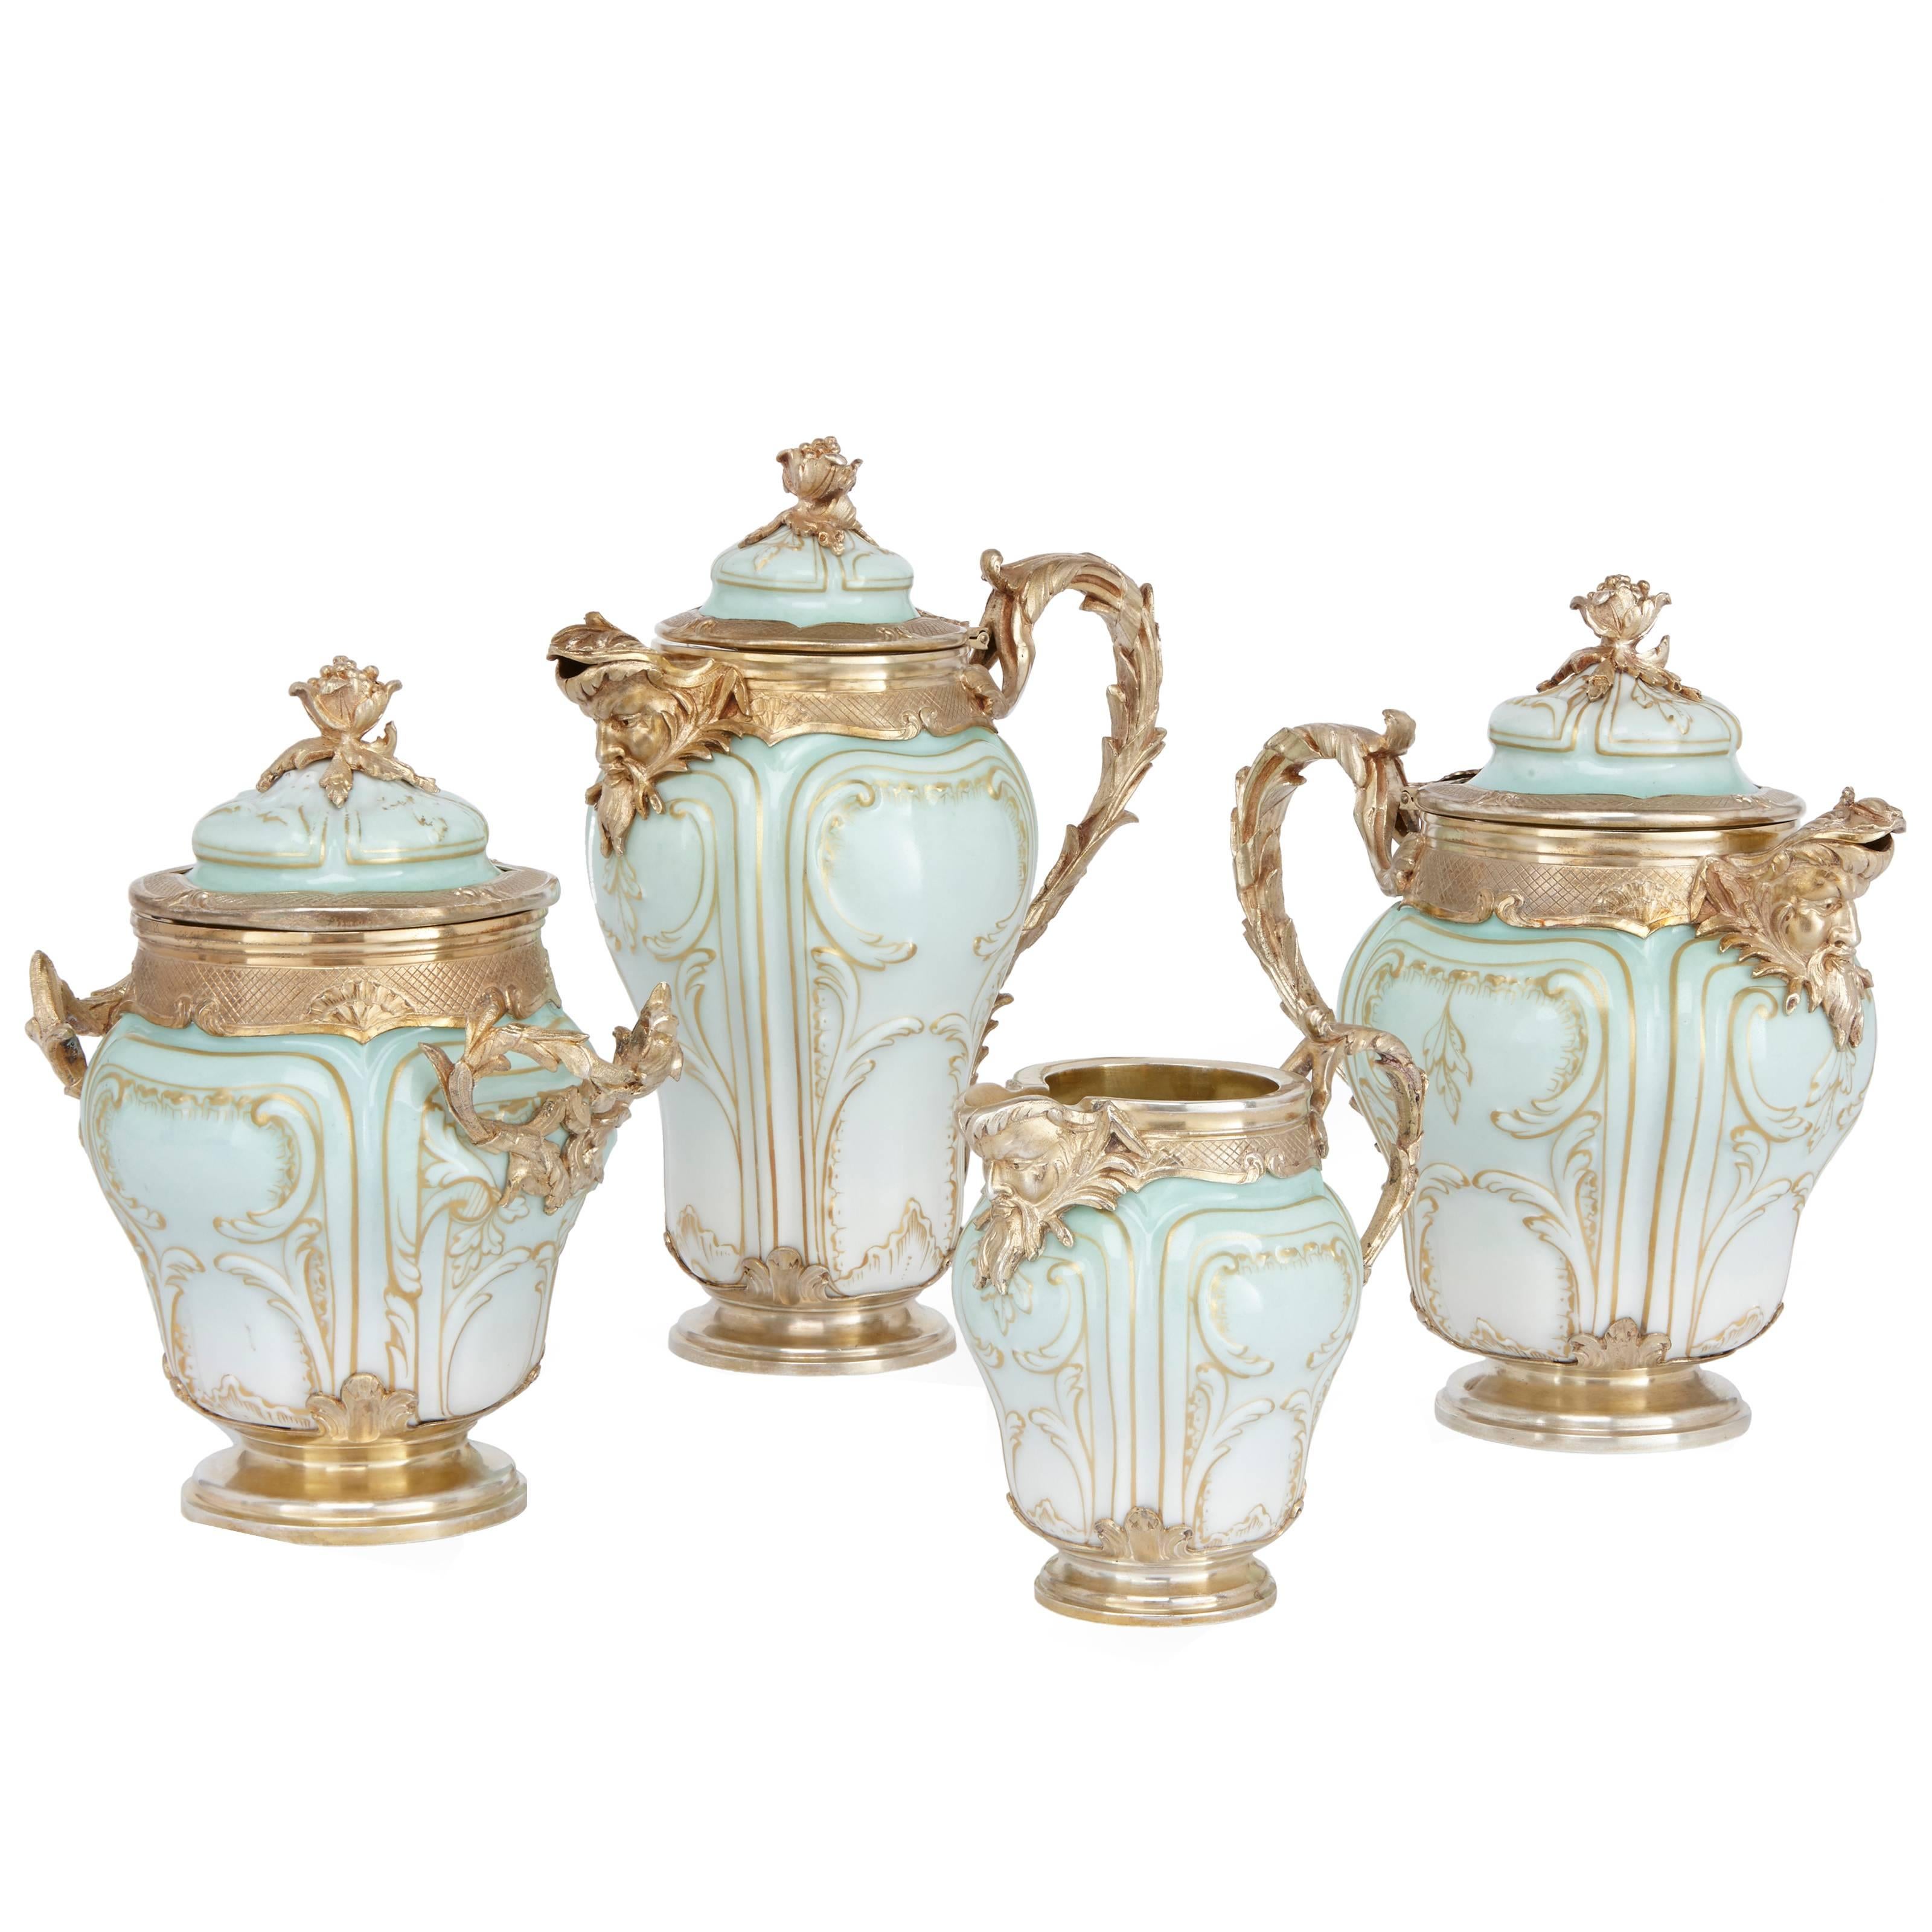 Silver Gilt Mounted Porcelain Tea and Coffee Service